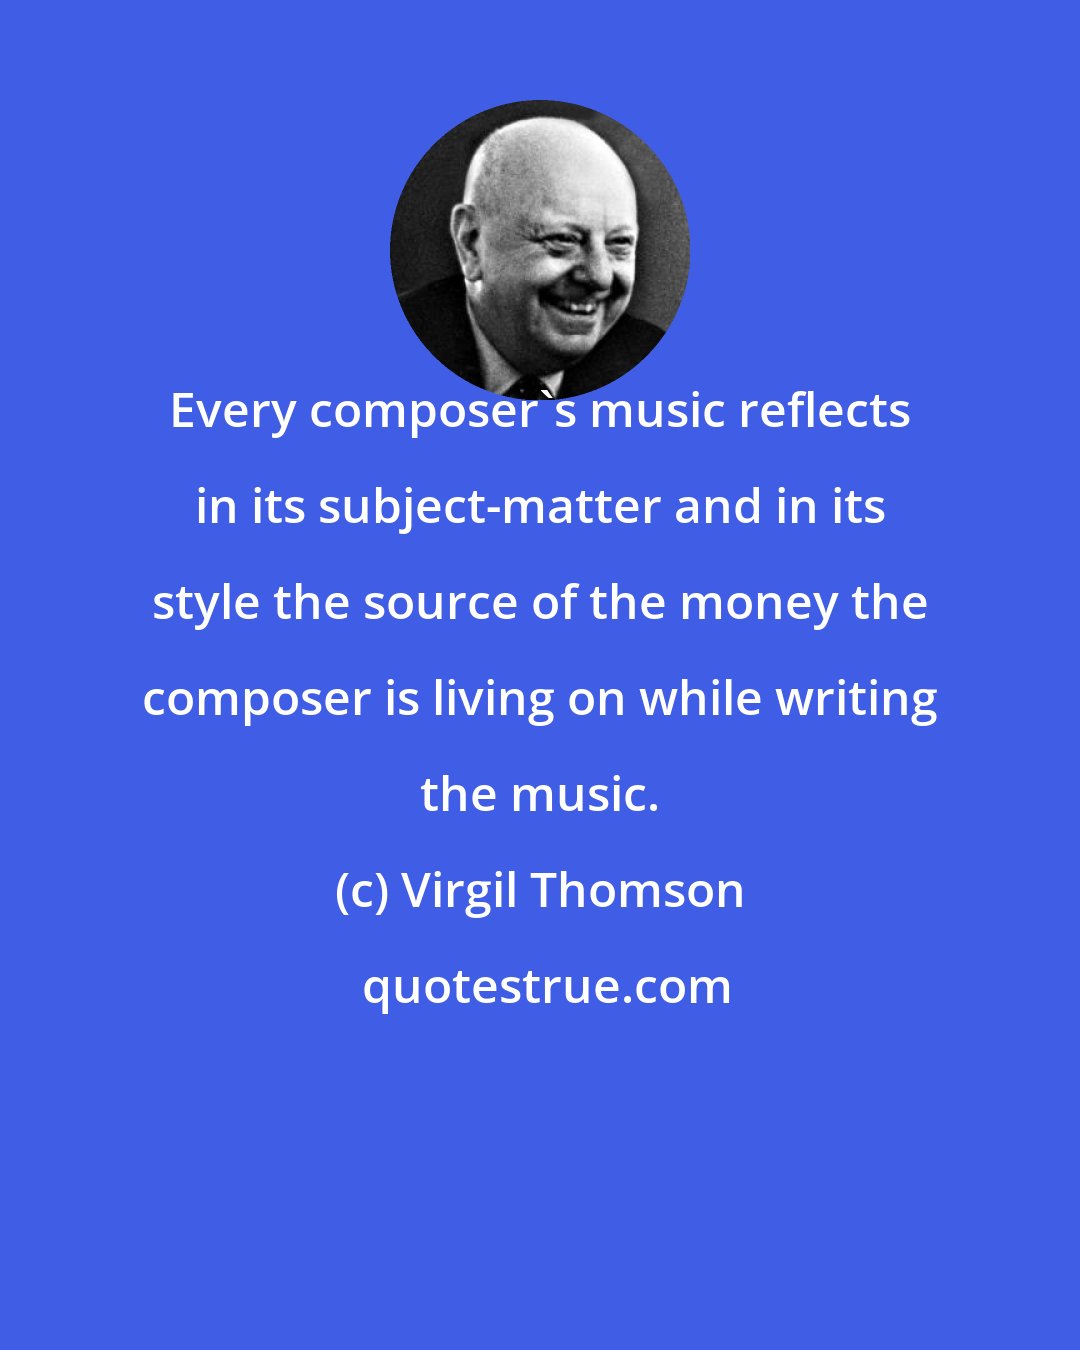 Virgil Thomson: Every composer's music reflects in its subject-matter and in its style the source of the money the composer is living on while writing the music.